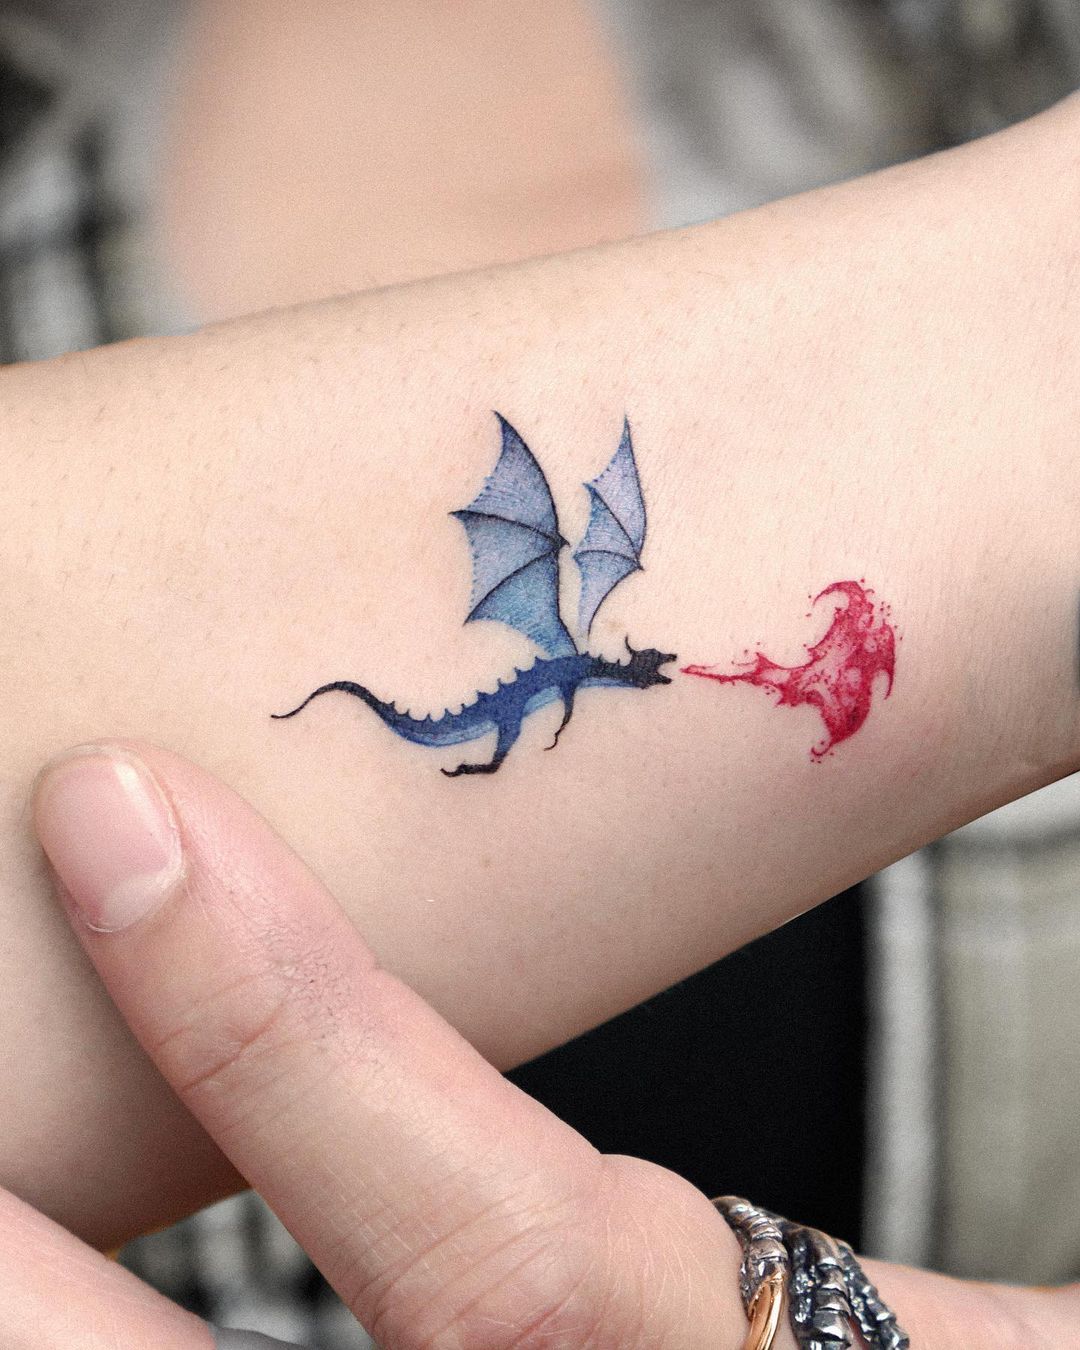 22,456 Abstract Dragons Tattoos Images, Stock Photos, 3D objects, & Vectors  | Shutterstock